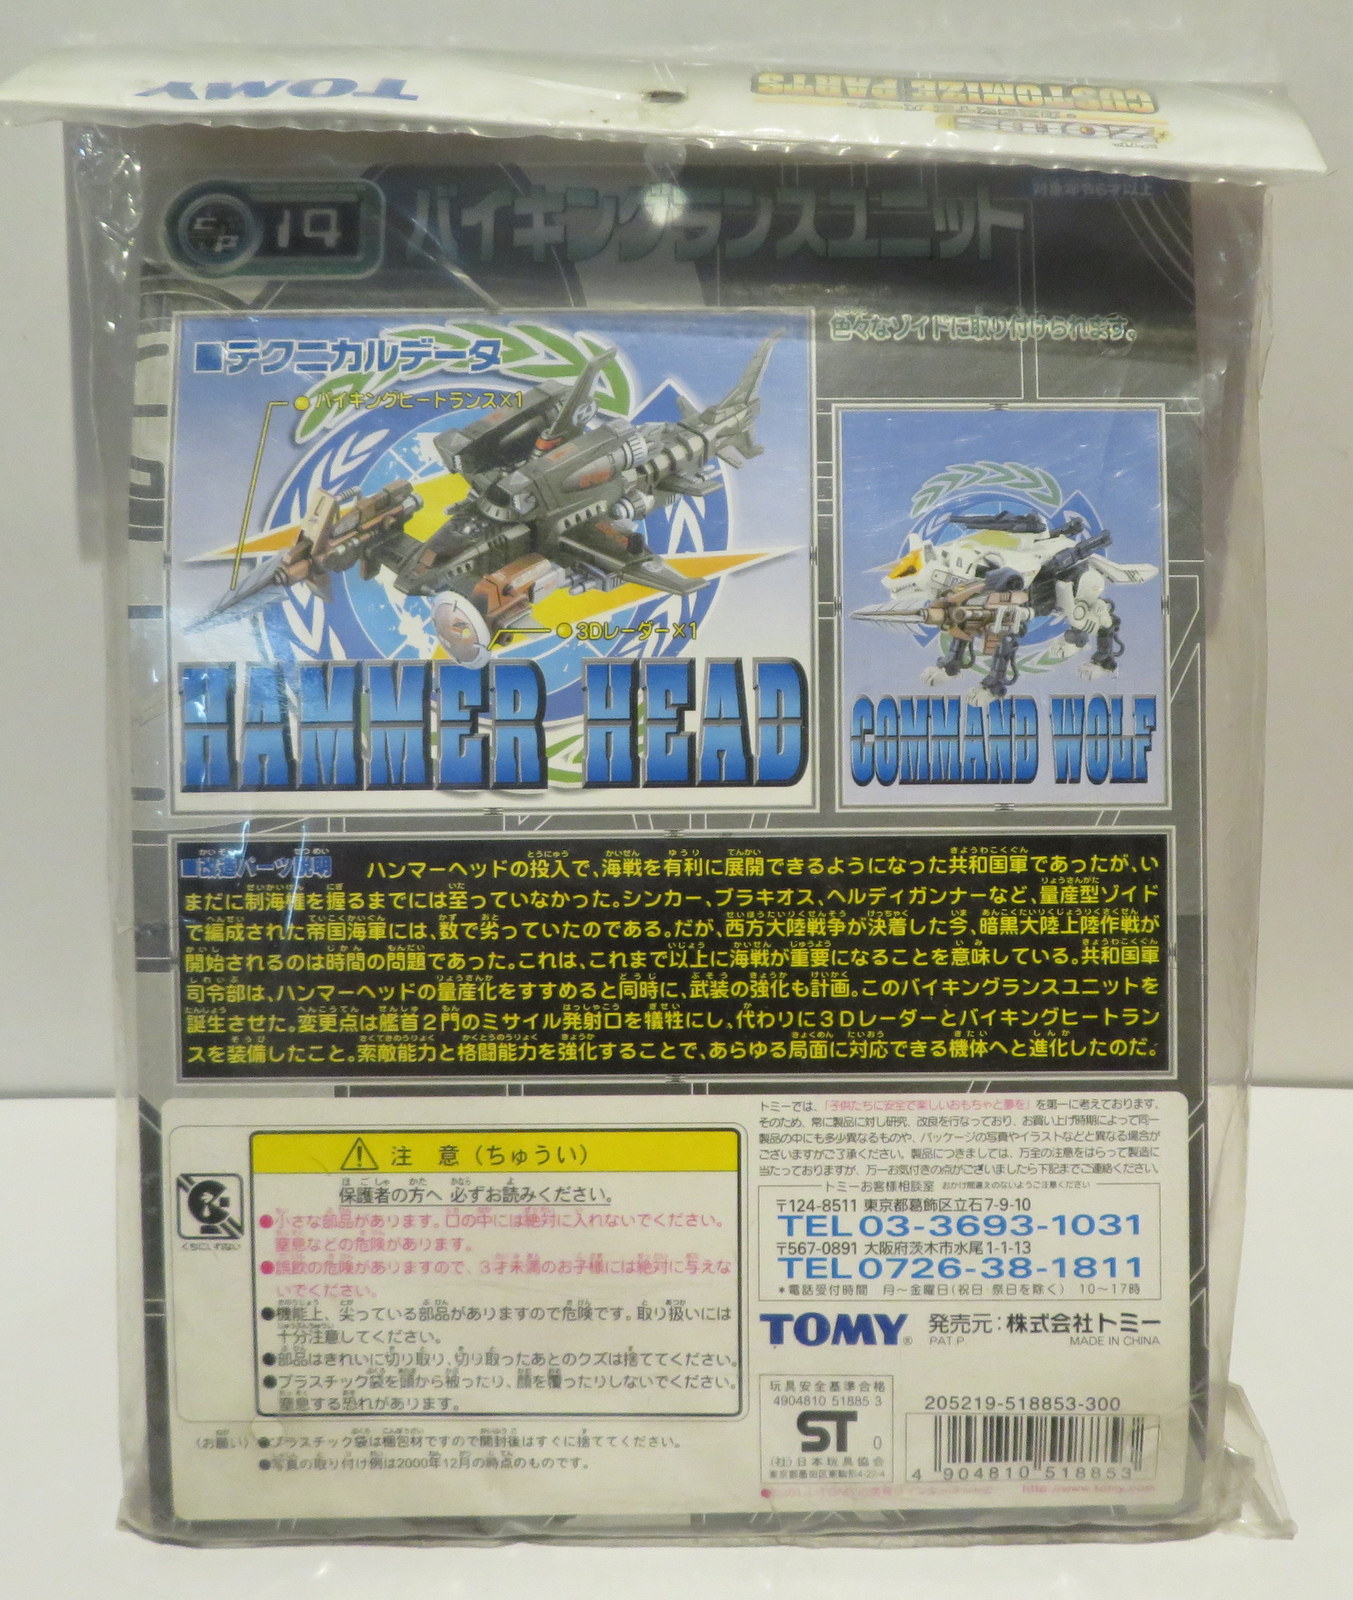 TOMY Zoids Customize Parts Viking Lance Unit CP14 for sale online